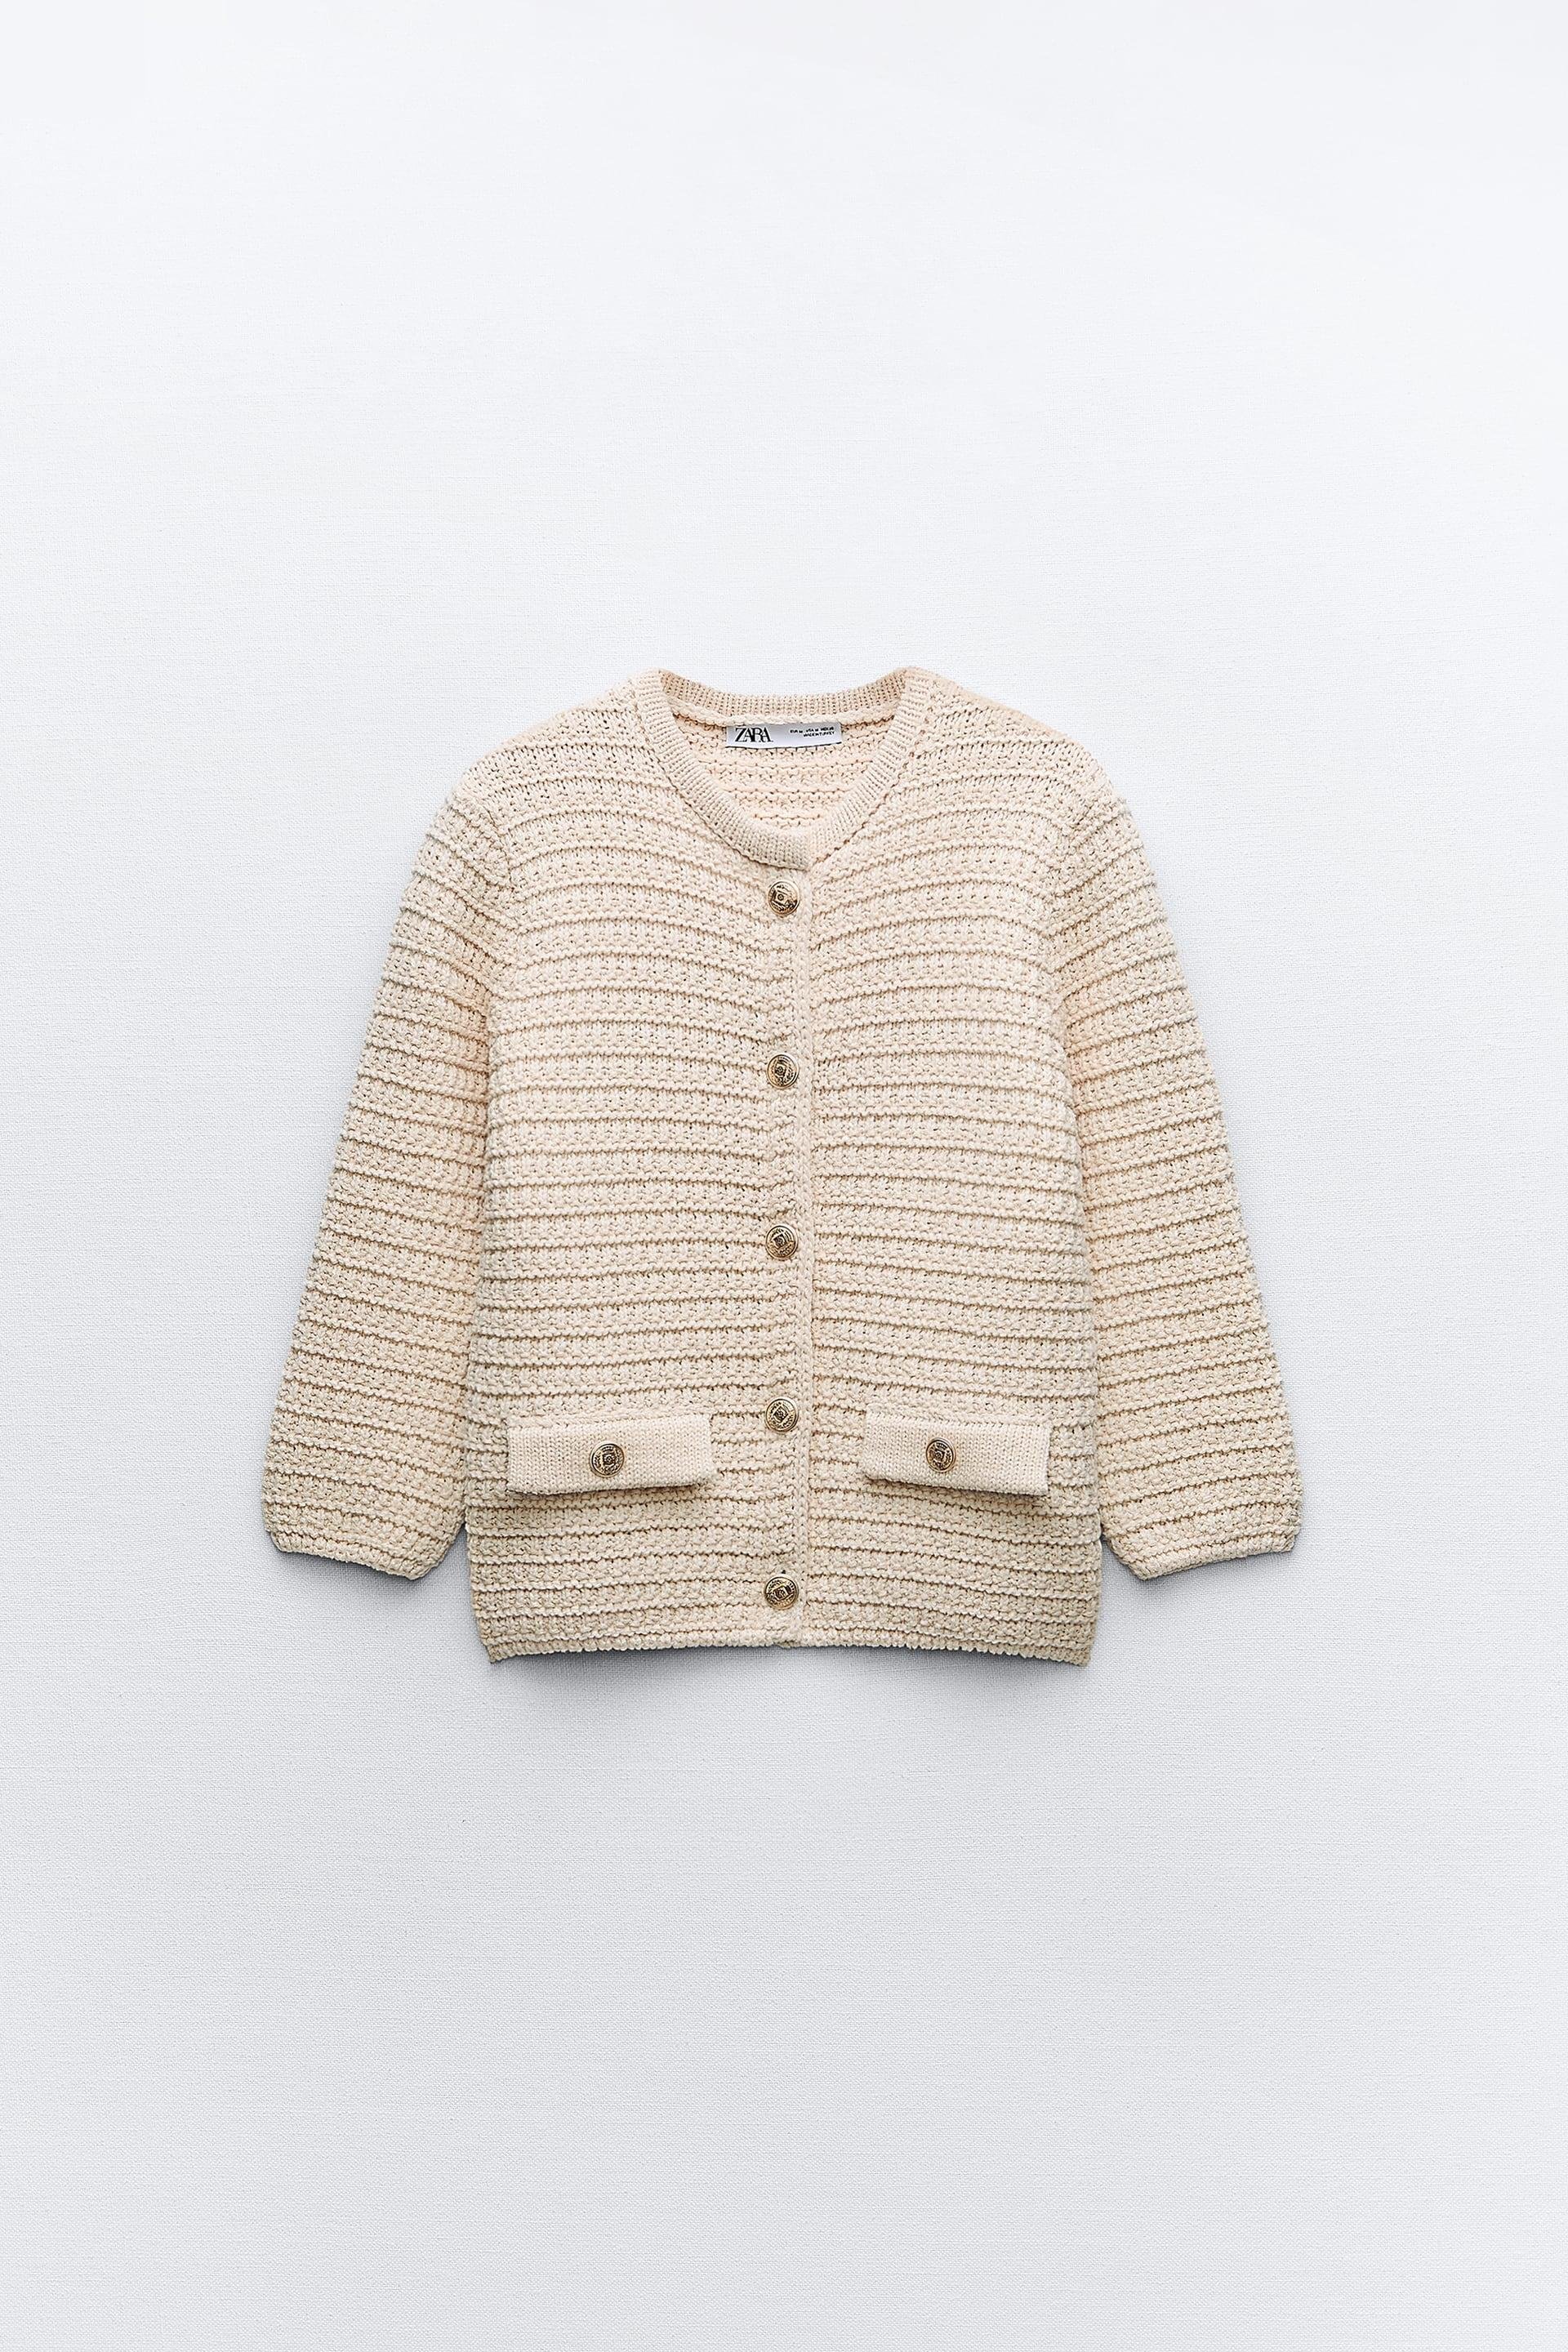 KNIT CARDIGAN WITH ELBOW-LENGTH SLEEVES by ZARA